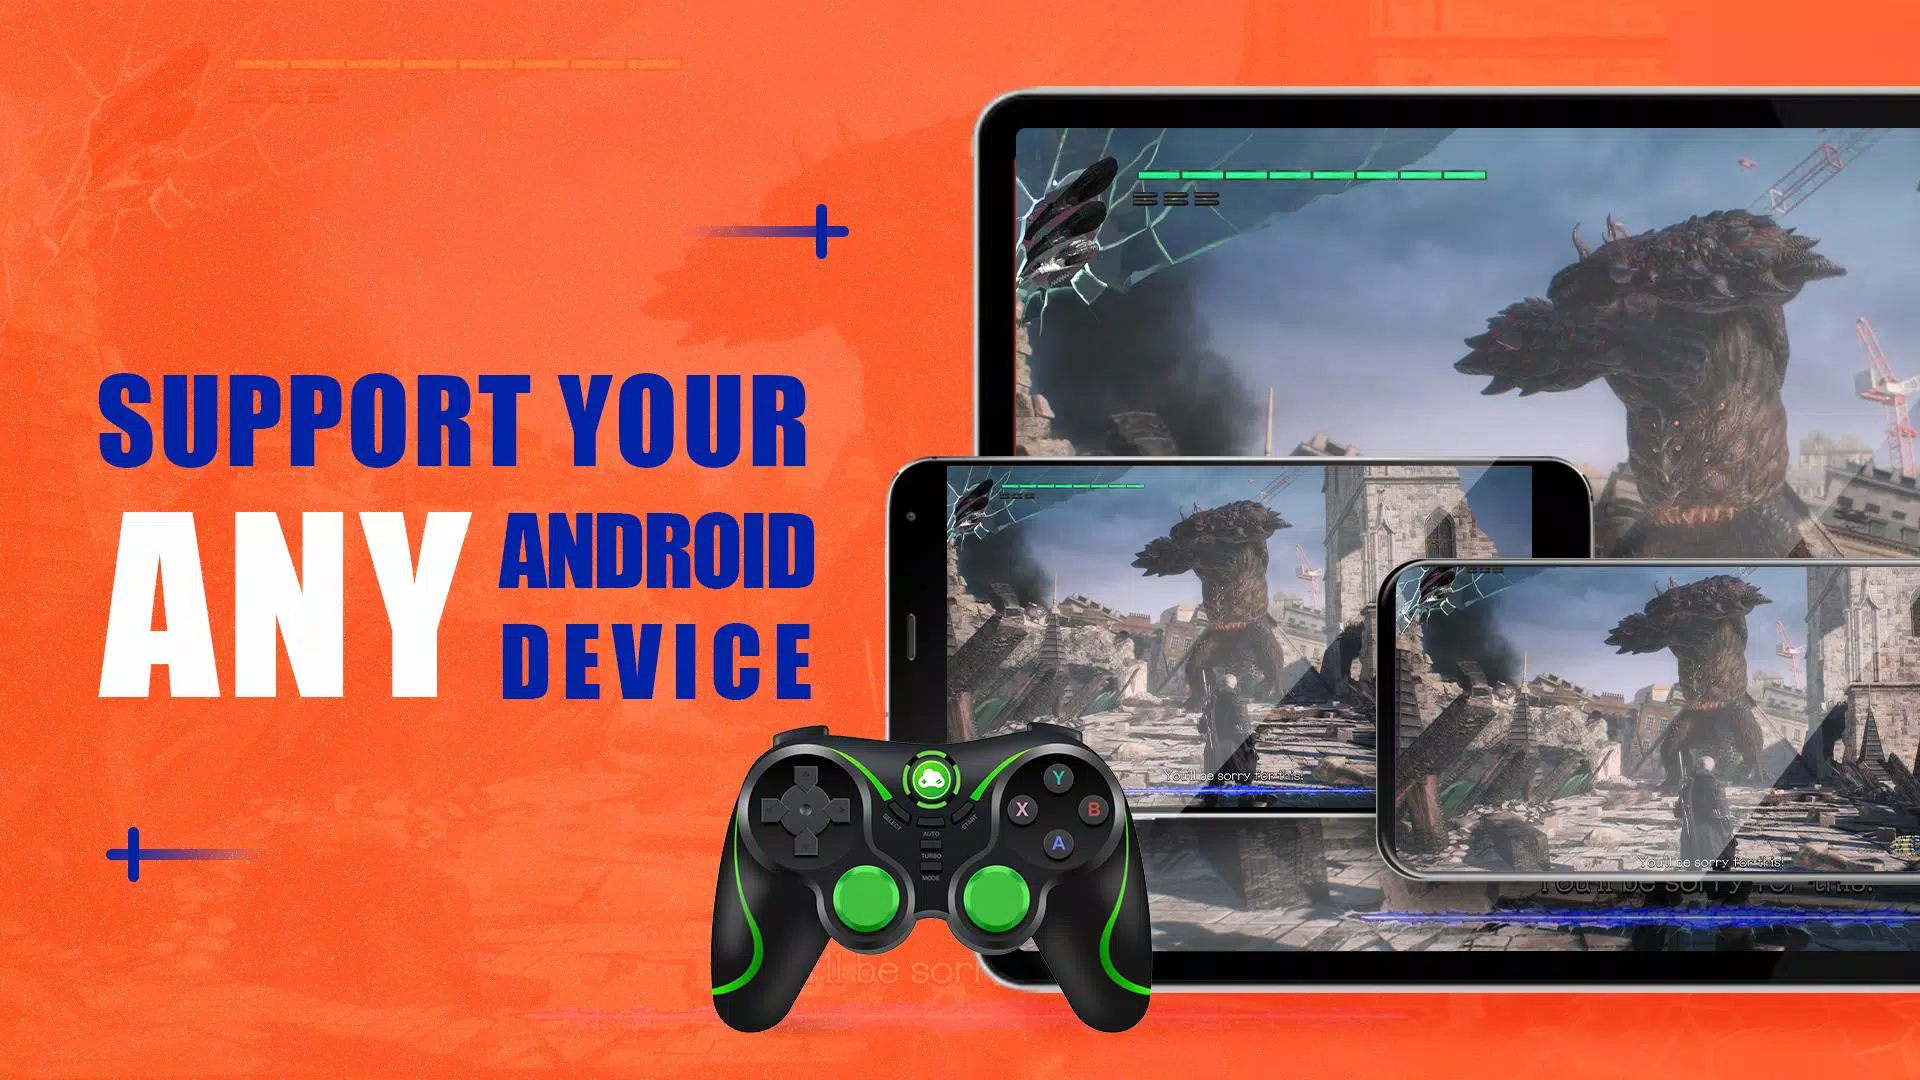 Gloud Games APK: Play PS4 And XBox Games On Android For Free - DOCTOR XIAOMI